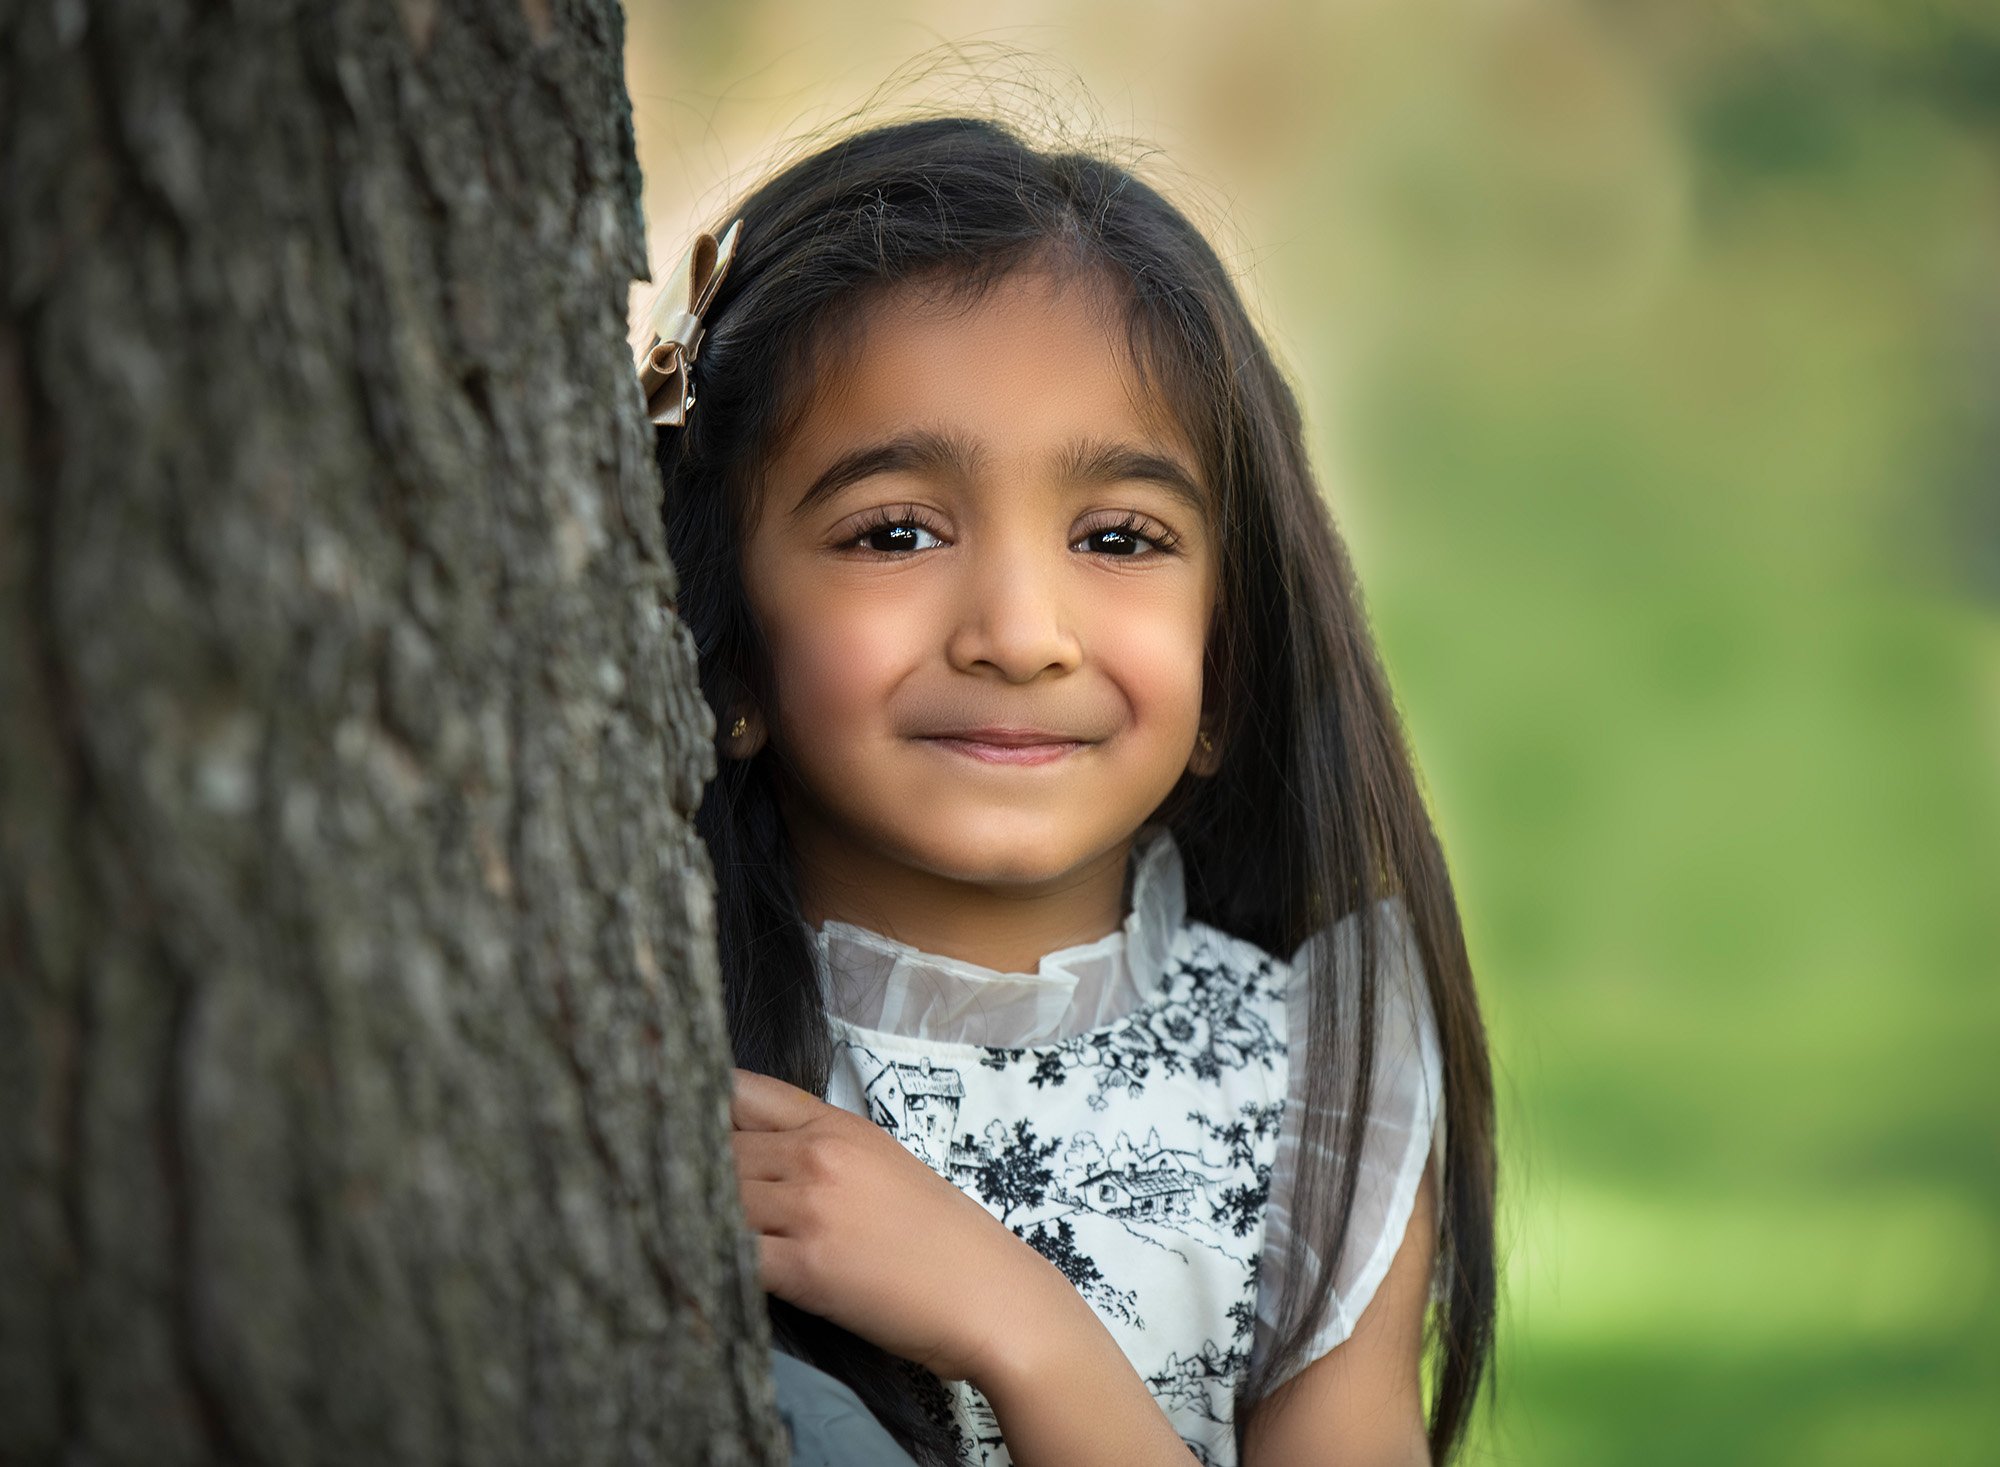 sweet little girl in black and white ruffled dress smiling while posing next to a tree